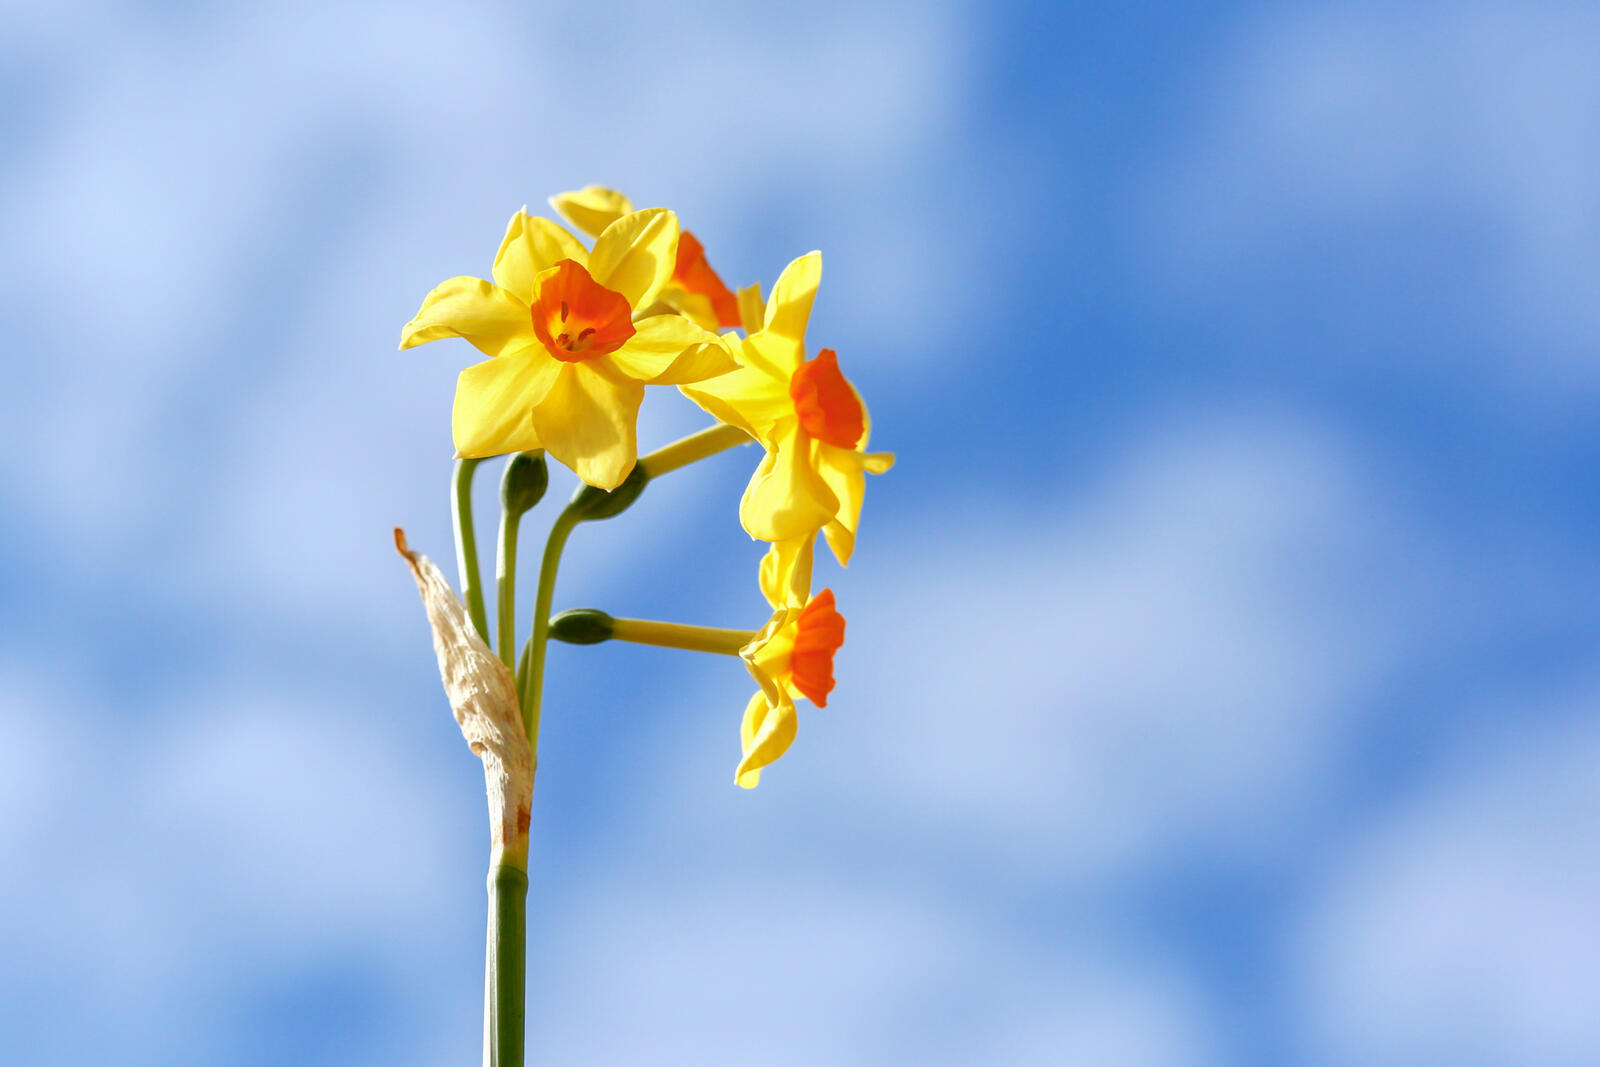 Wallpapers flowers yellow narcissus on the desktop